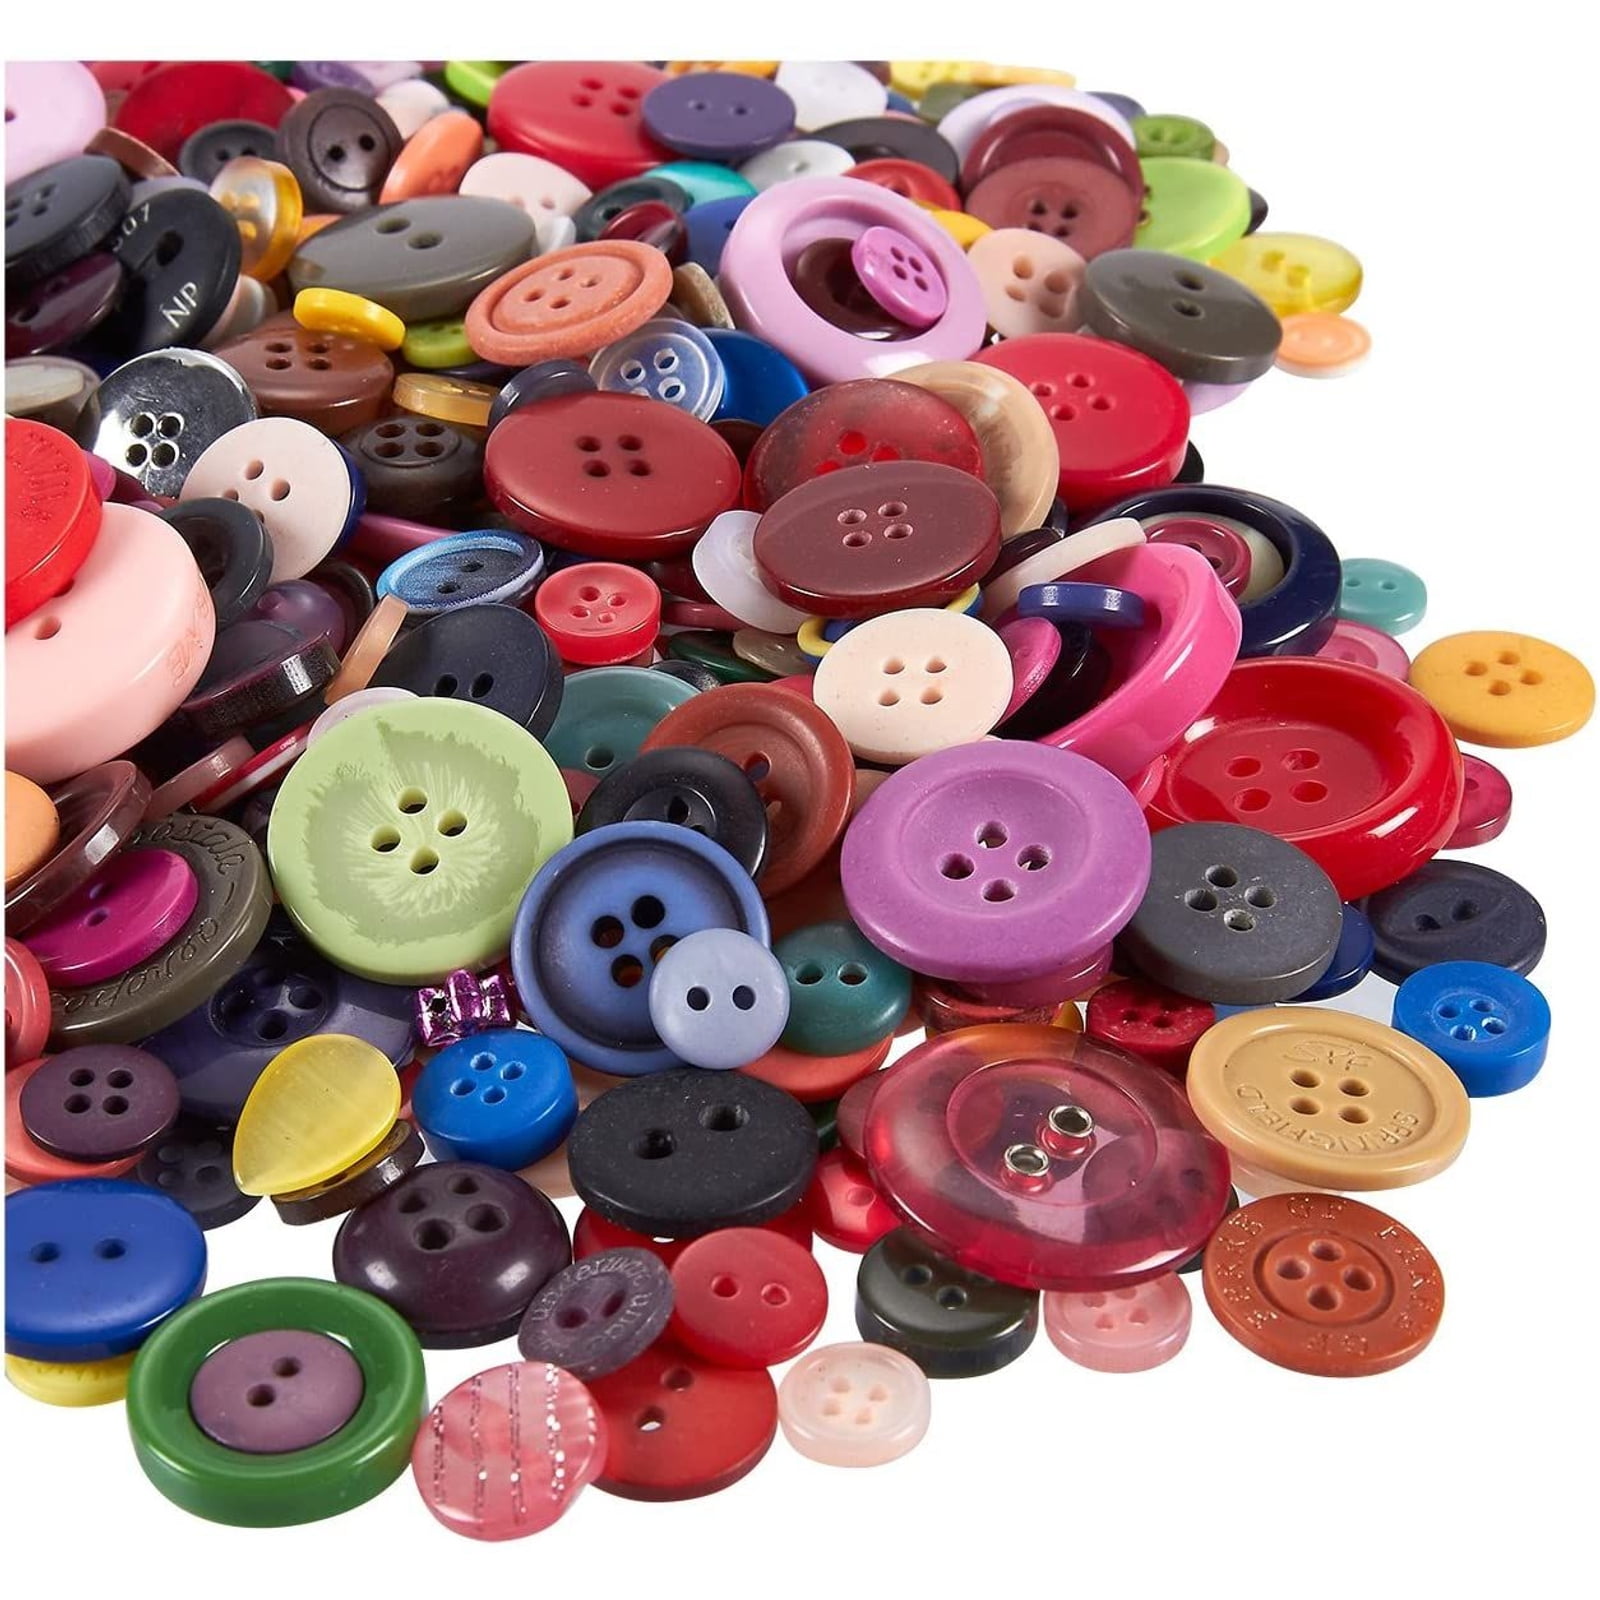 Bulk Buttons, 500 Pastel Colored Buttons, Craft Buttons, Sewing Buttons,  Lot PST-1